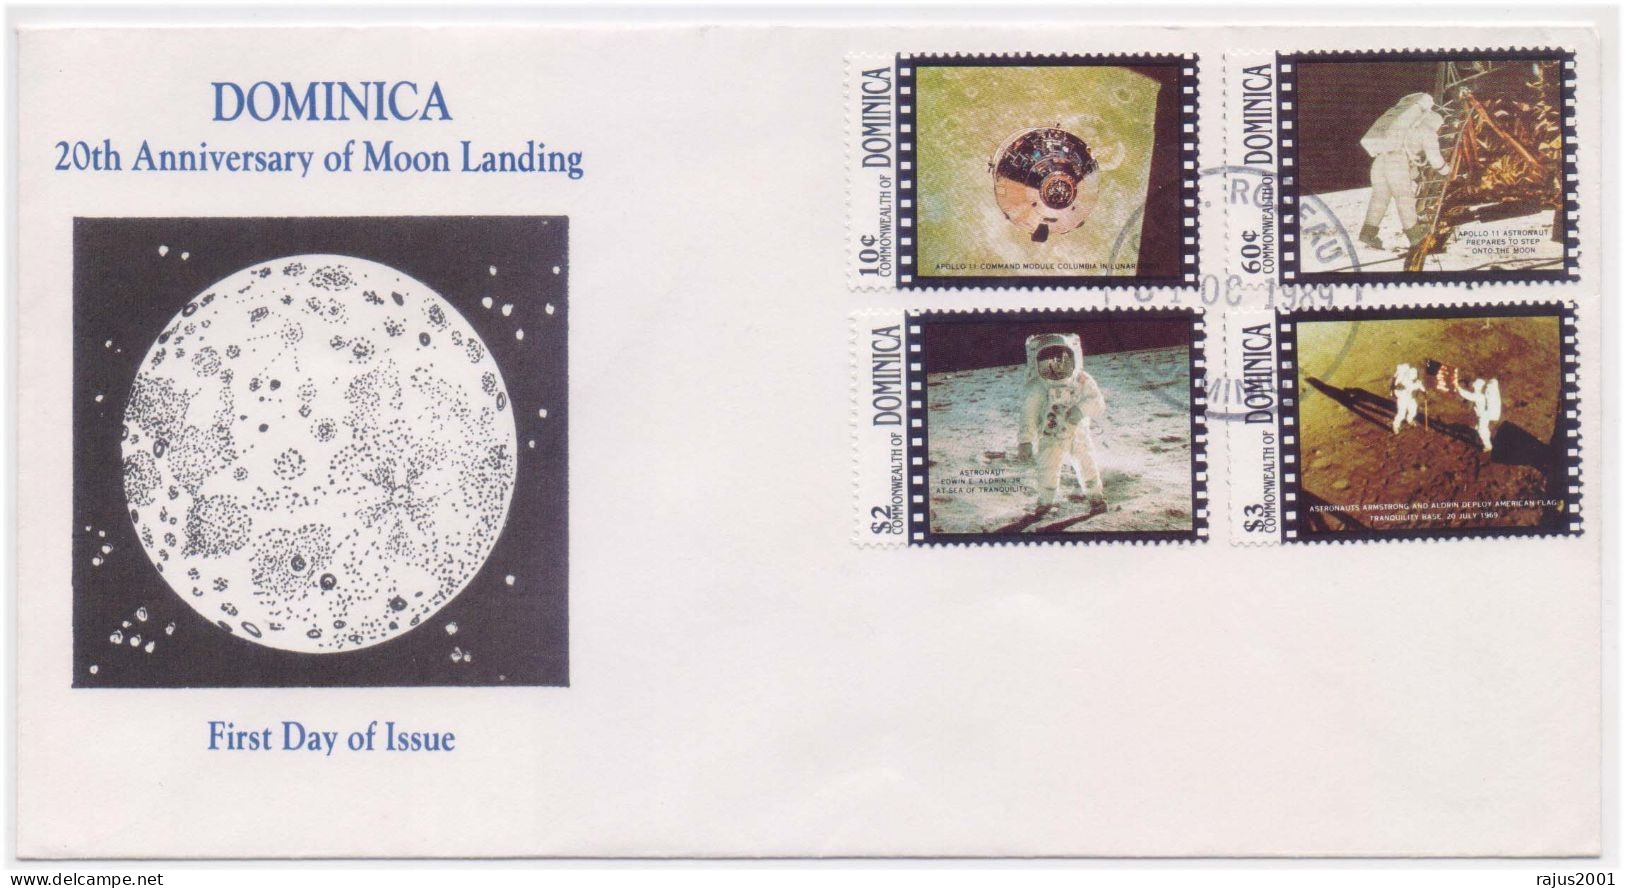 NASA  Apollo II Mission, Module Columbia, Lunar Module Eagle First Landing On The Moon, Space, Science, Astronomy FDC - Astronomie